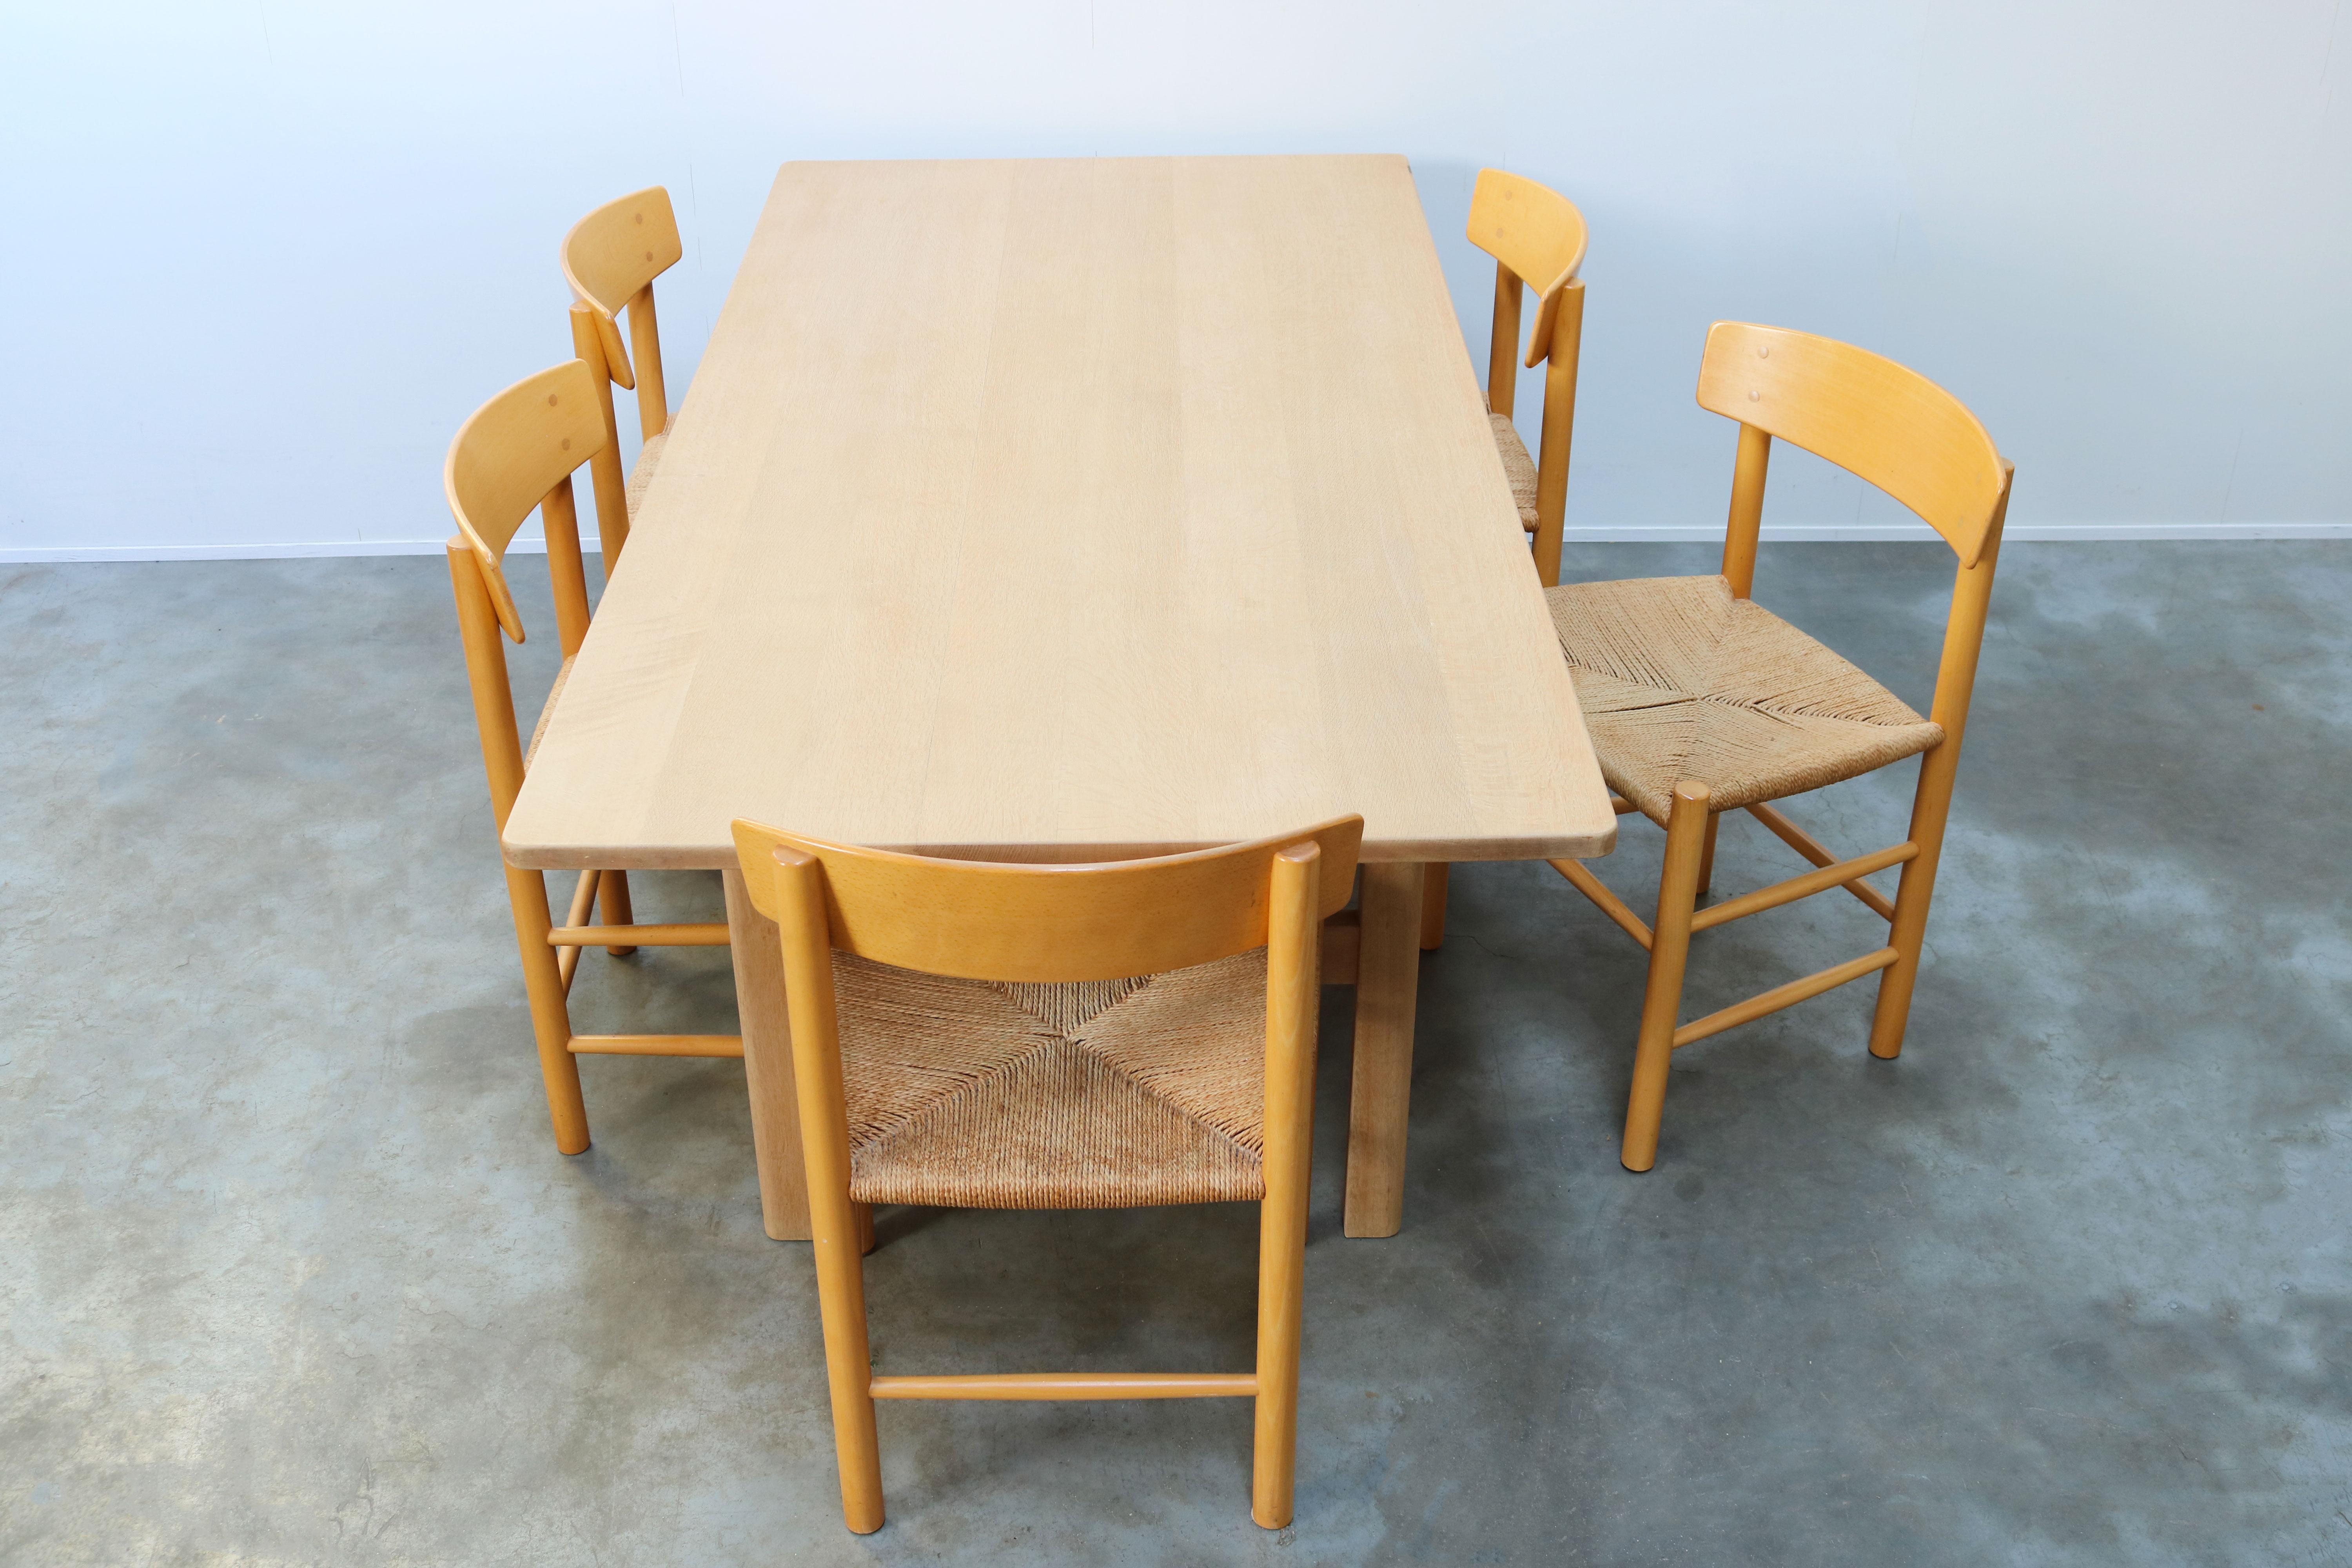 Rare Danish dining set by Borge Mogensen for Fredericia in the 1950s wonderful clean Shaker styled design. The set consist of five J39 chairs also referred to as ''The Peoples Chair'' with papercord and a matching rare model: 6284 Shaker table in